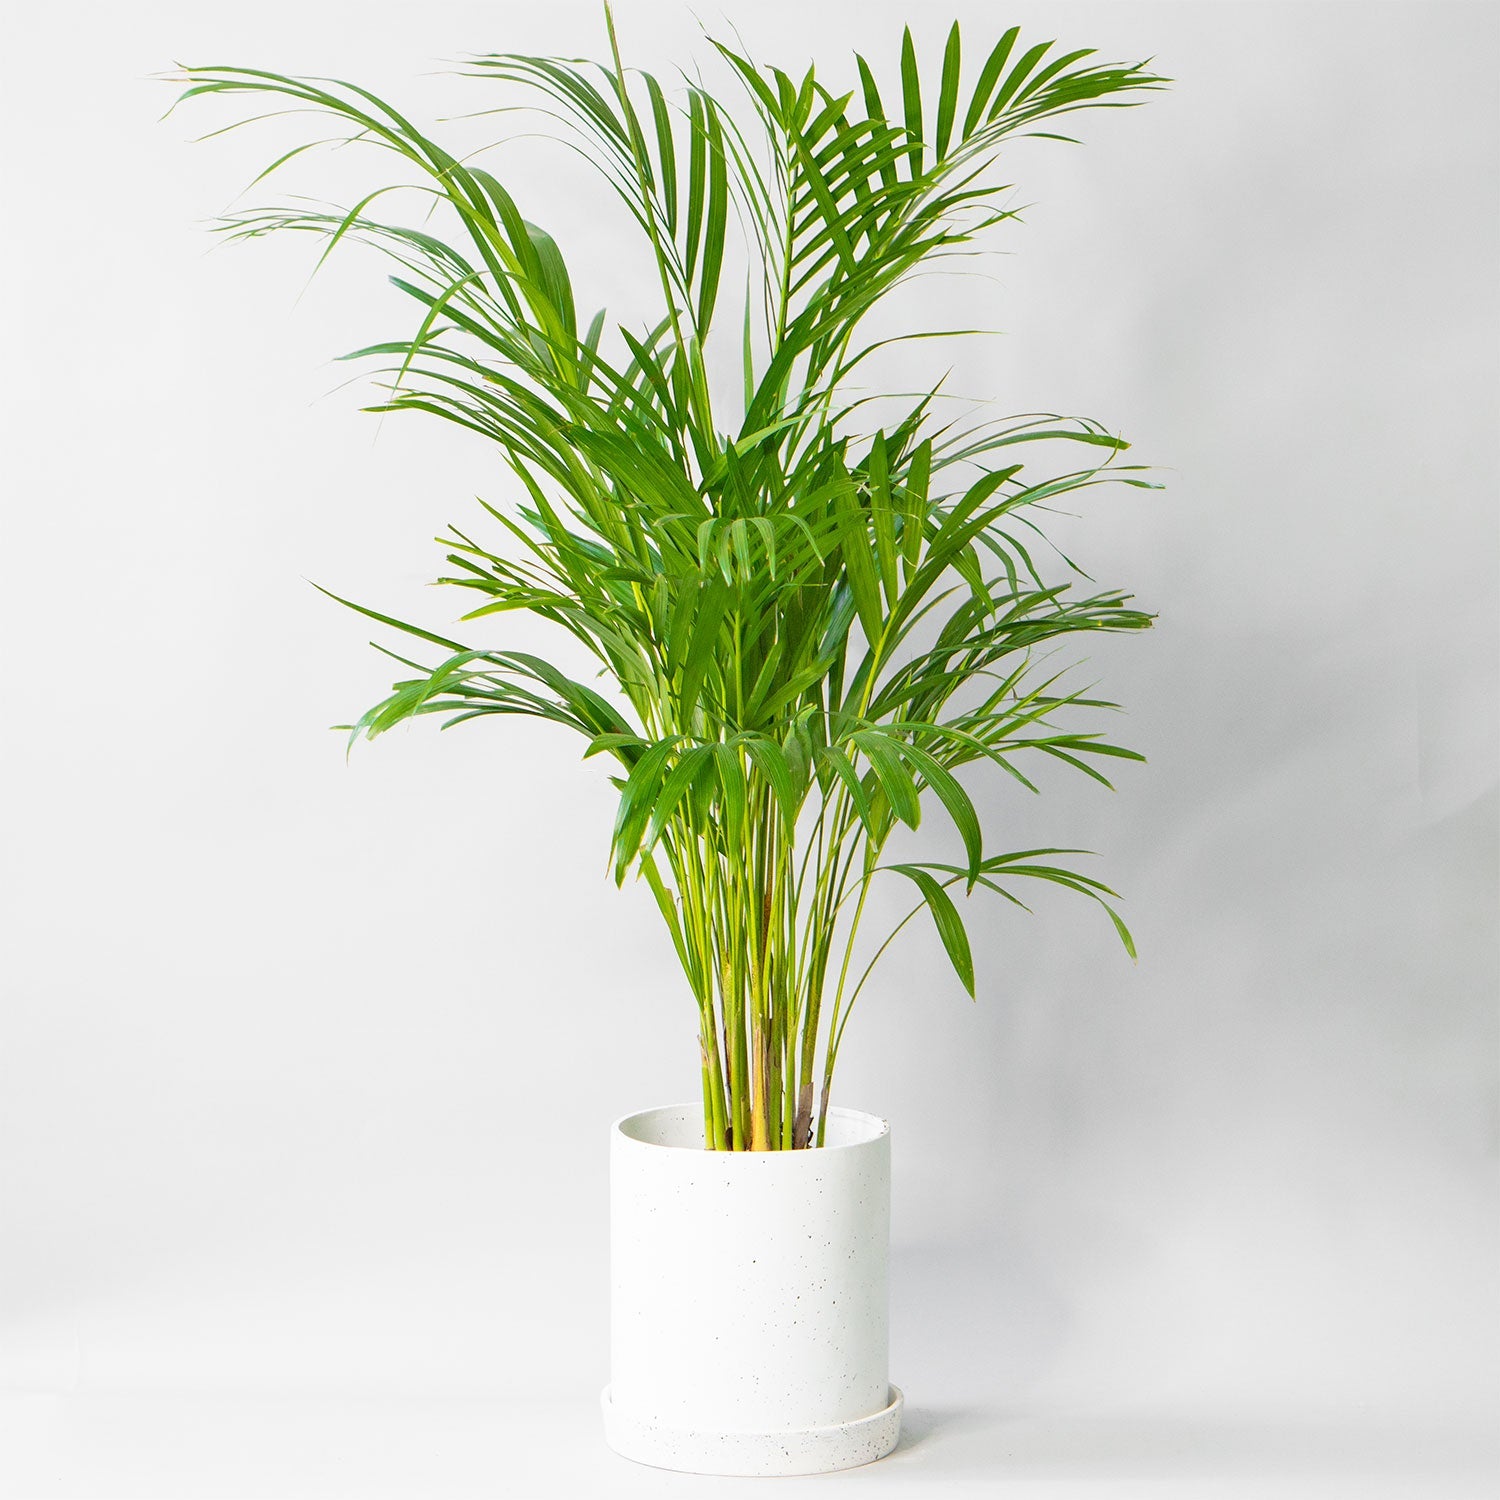 Large Potted Seifrizzi Palm Chamaedorea - Best Quality Easy-Care Floor Houseplant Seifrizzi Palm Chamaedorea 6” - Buy repotted pet friendly big indoor plant Seifrizzi Palm Chamaedorea for delivery at Planteia